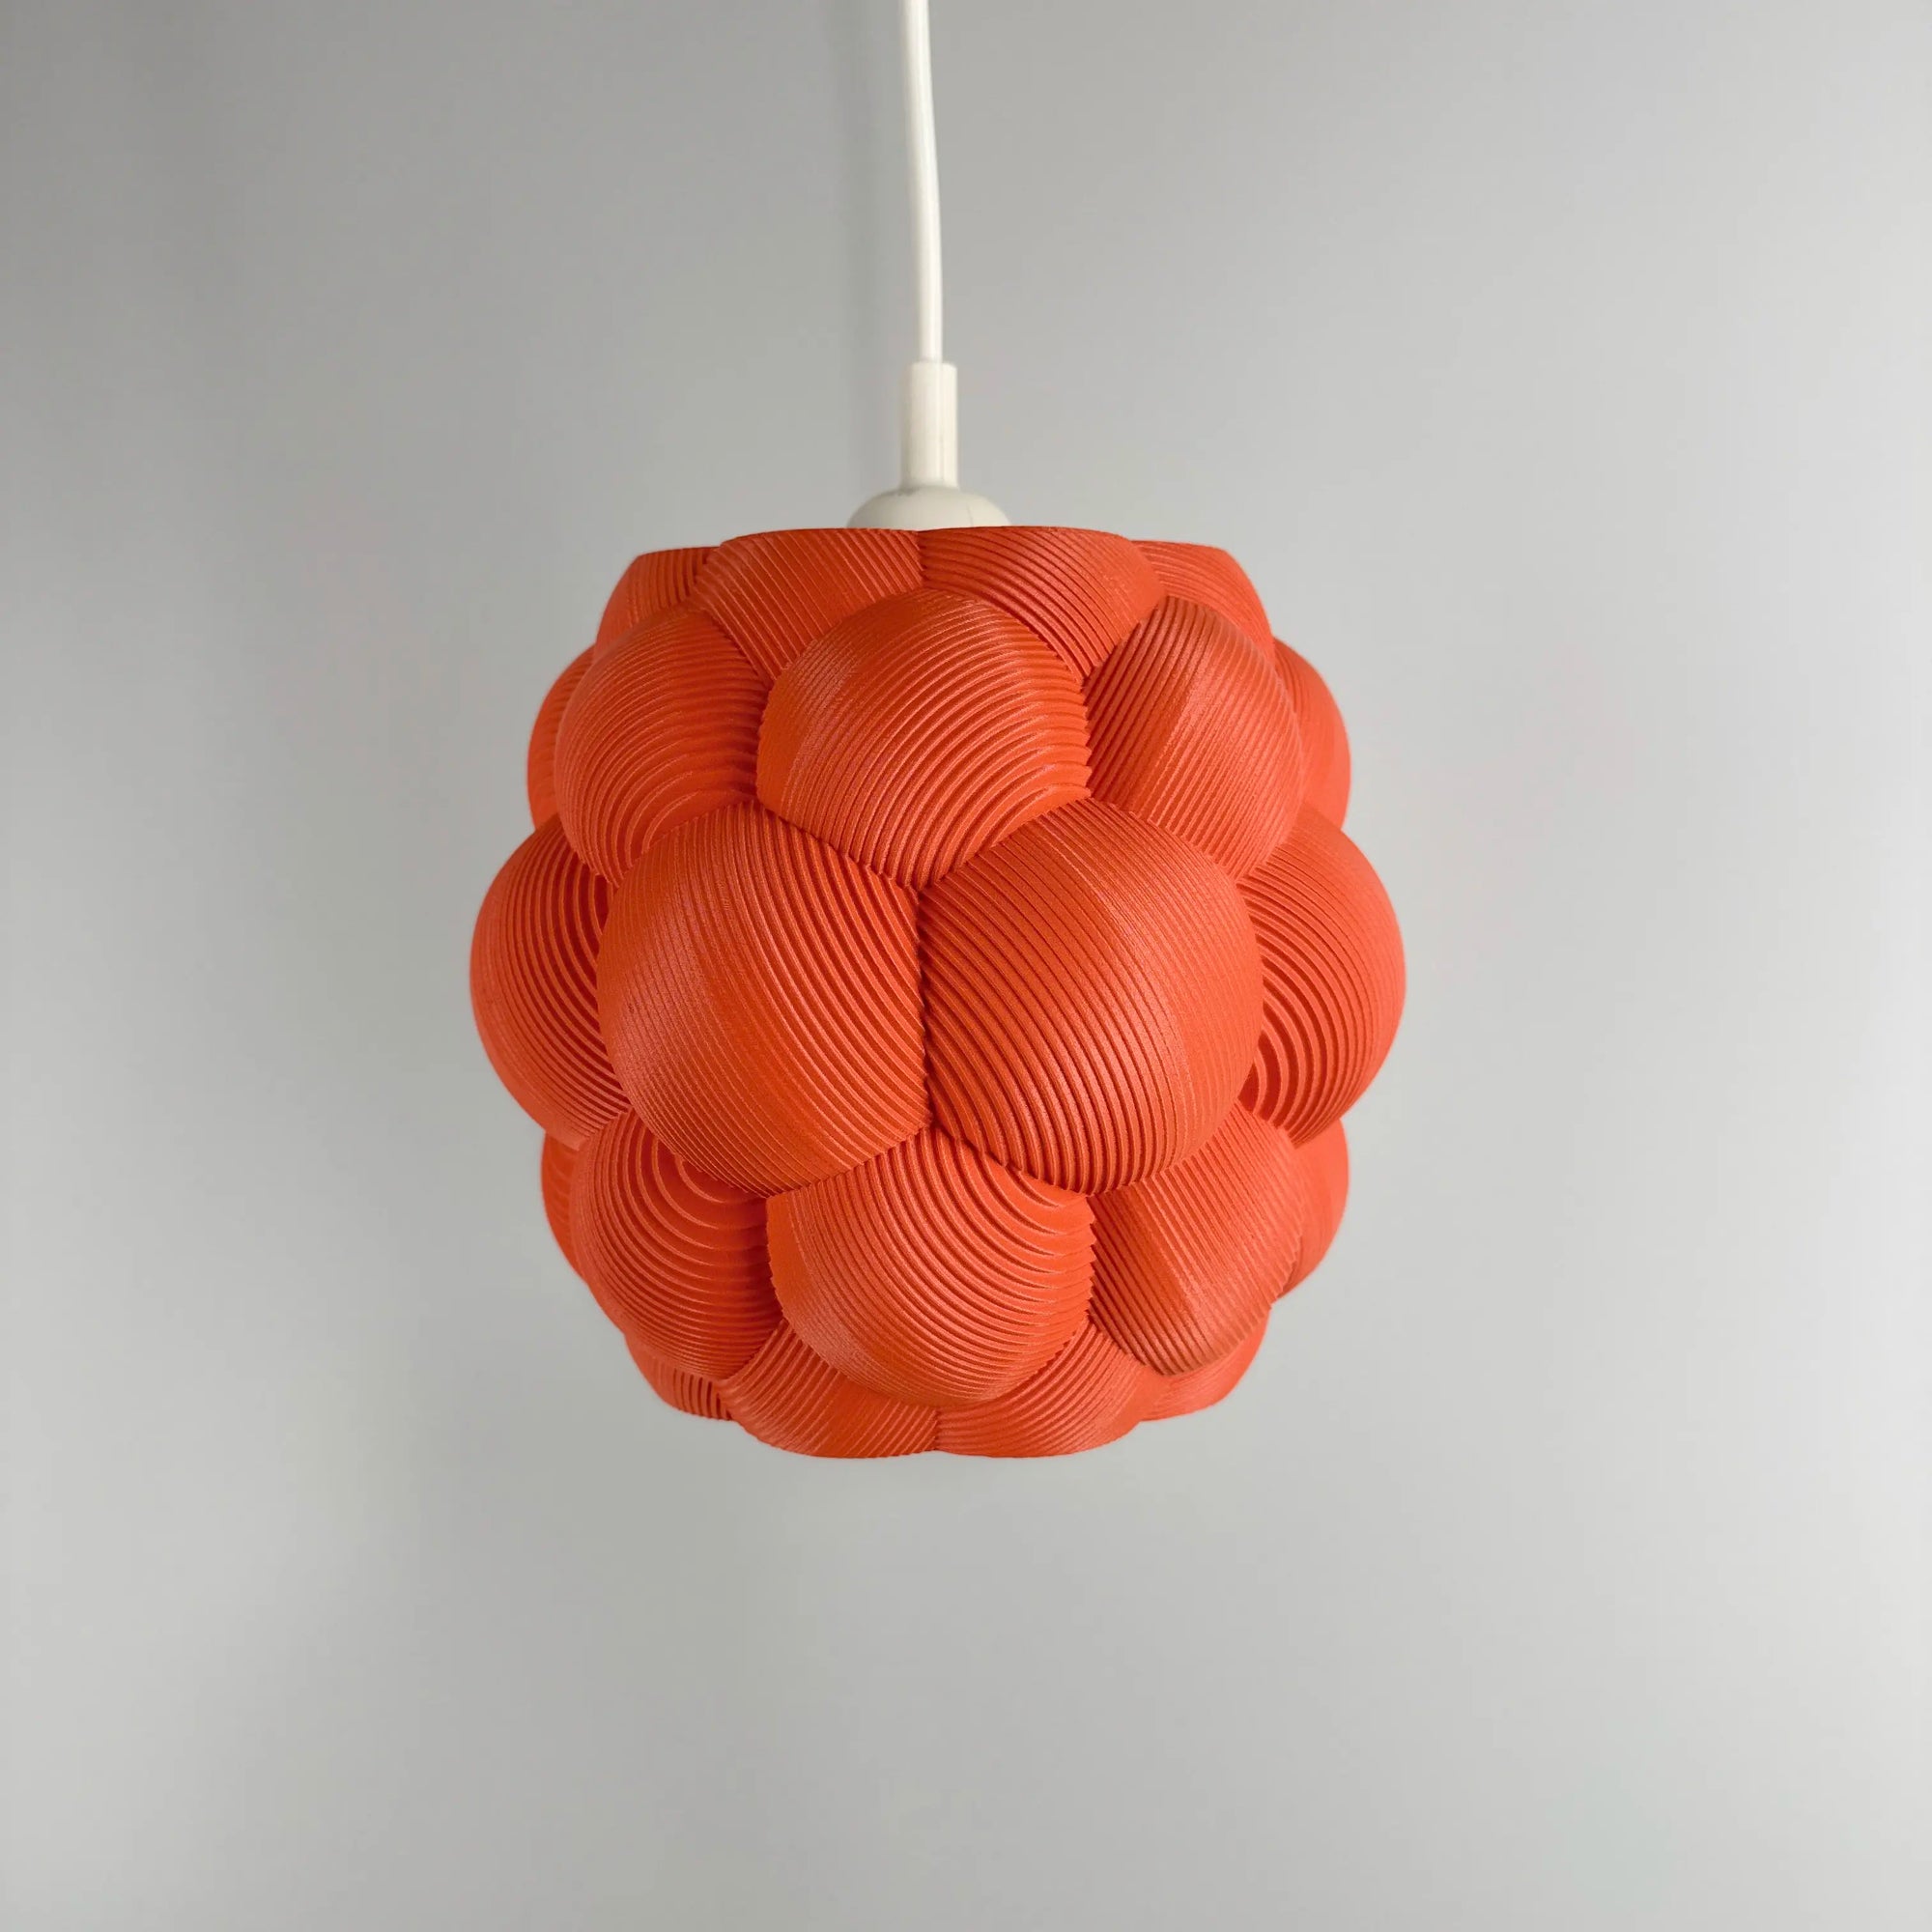 3D printed Apo Malli lampshade in modern design in muted red biodegradable material. 